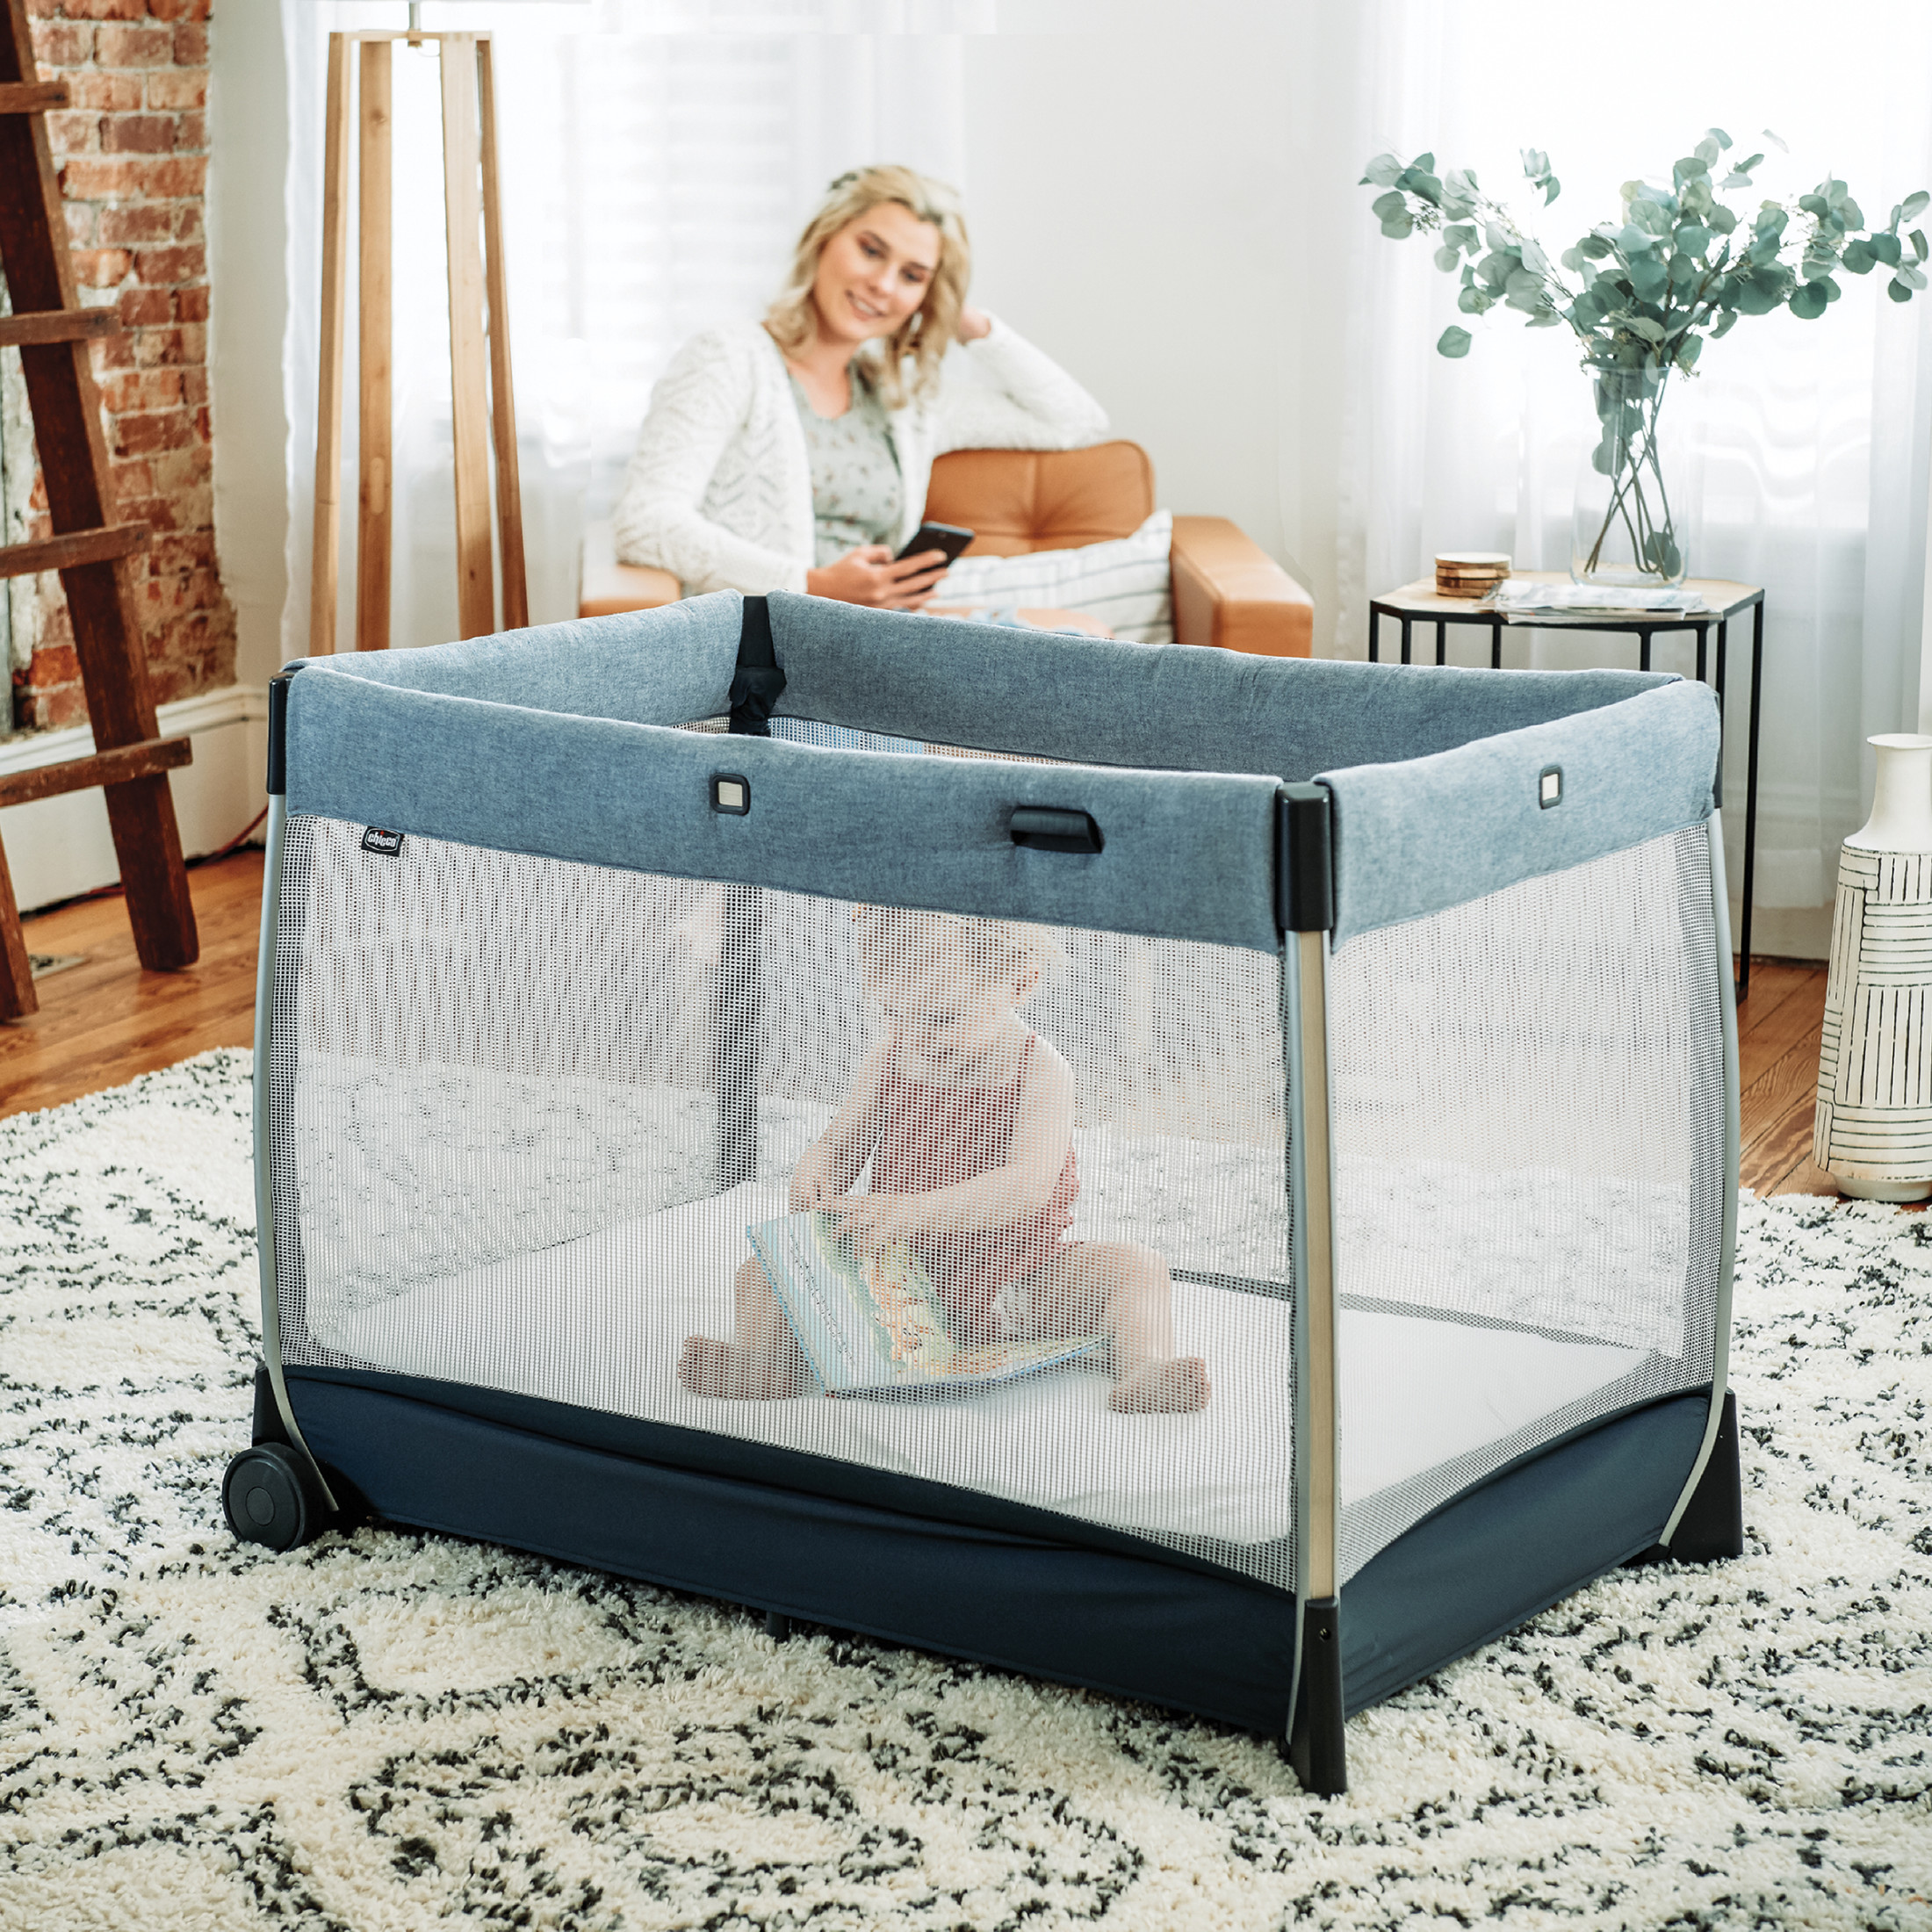 Chicco Lullaby Primo All-in-One Playard with Toy Bar and Deluxe Parent Organizer - Lakeshore (Navy) - image 3 of 14